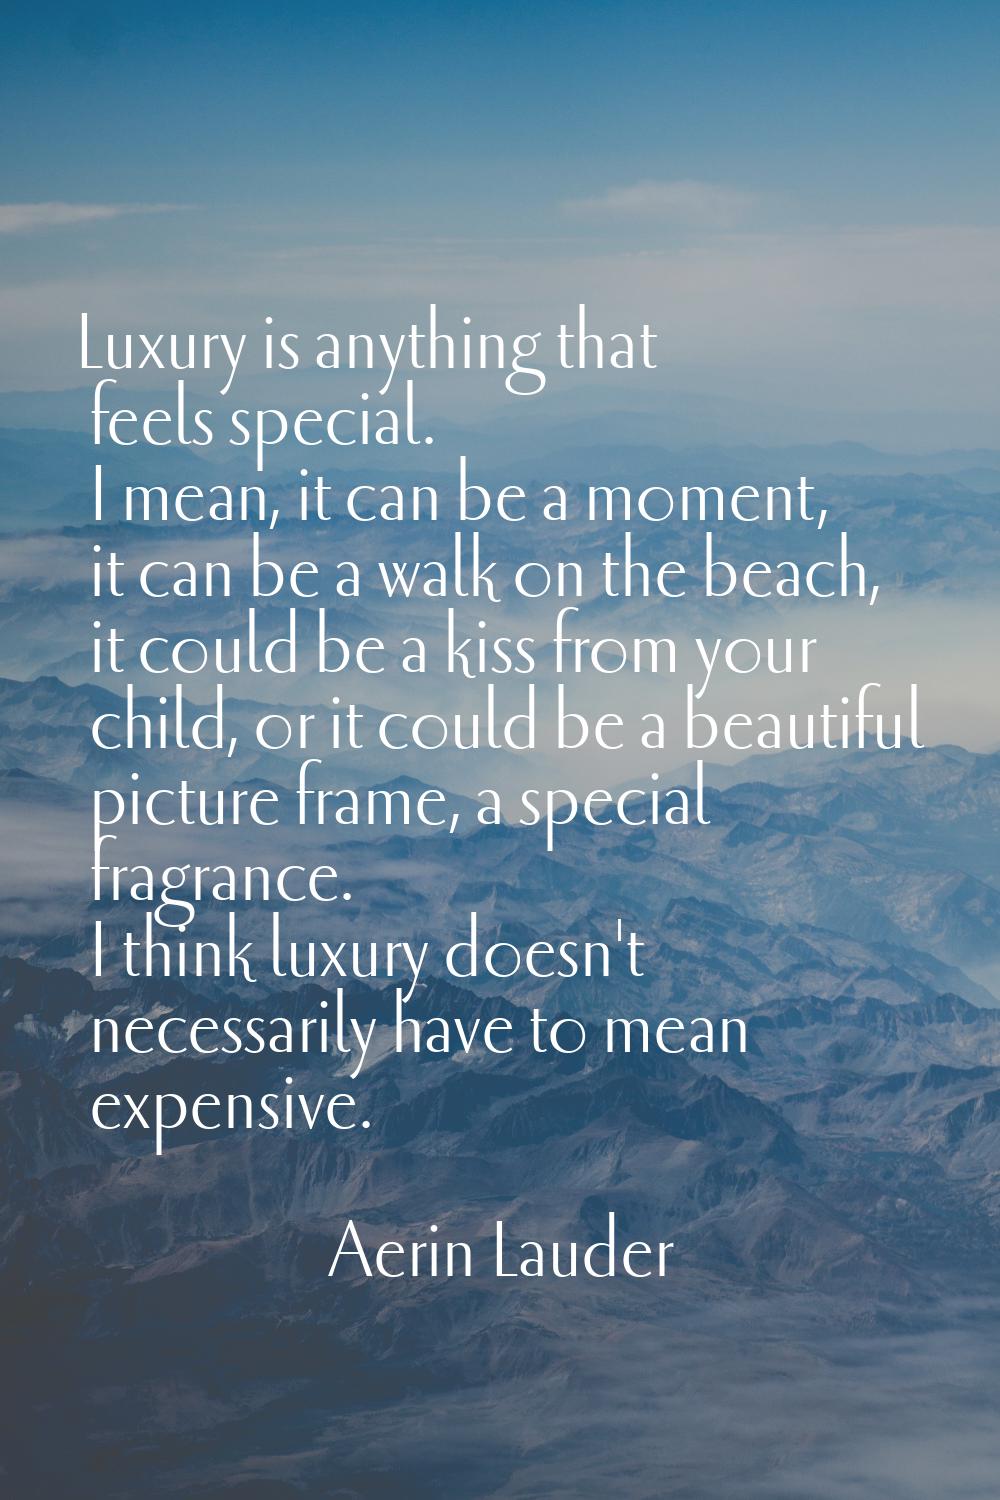 Luxury is anything that feels special. I mean, it can be a moment, it can be a walk on the beach, i